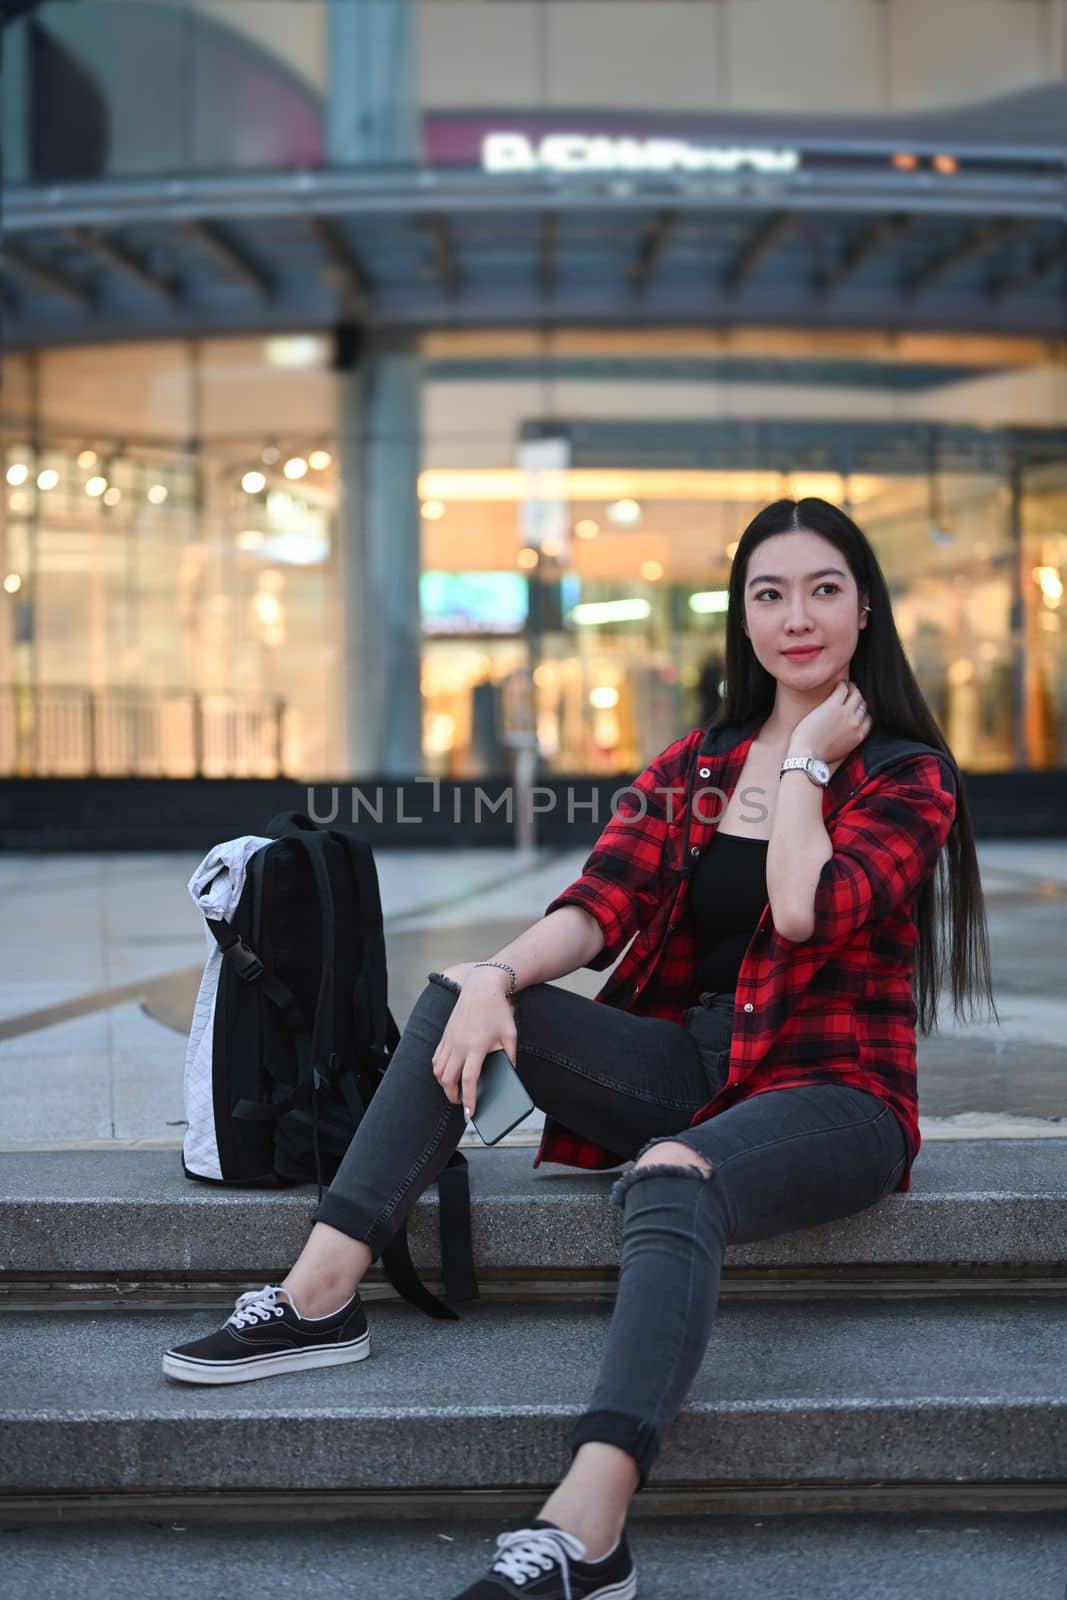 Full length portrait of smiling woman Asian woman sitting on stairs in city at night.